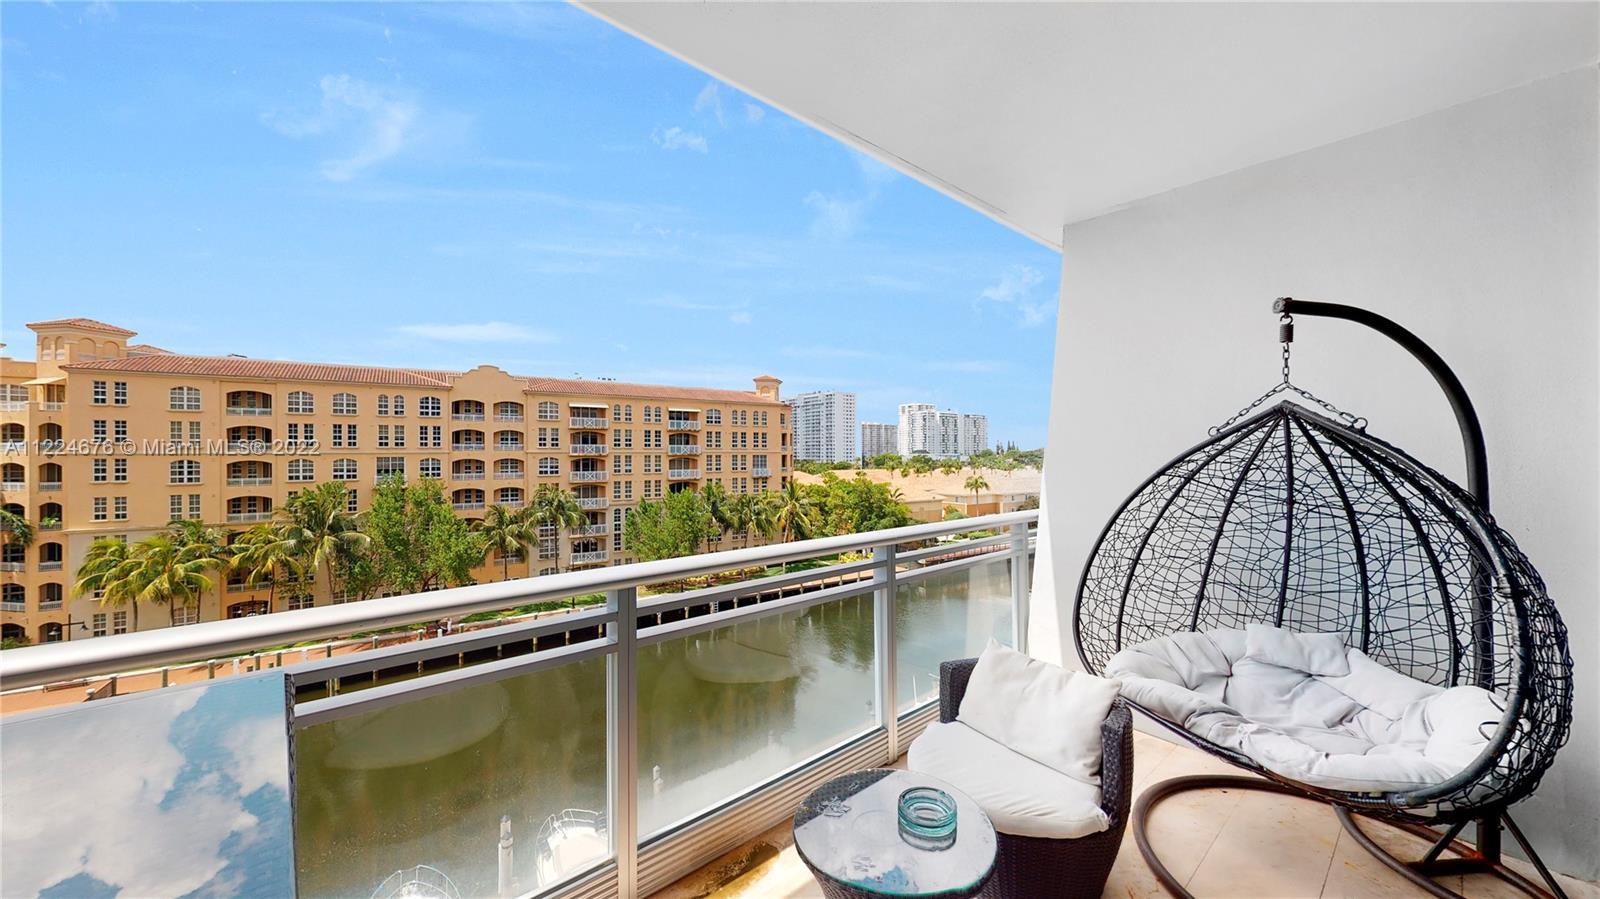 Elevate your lifestyle at the luxurious Artech Residences. This spacious condo is full of natural li